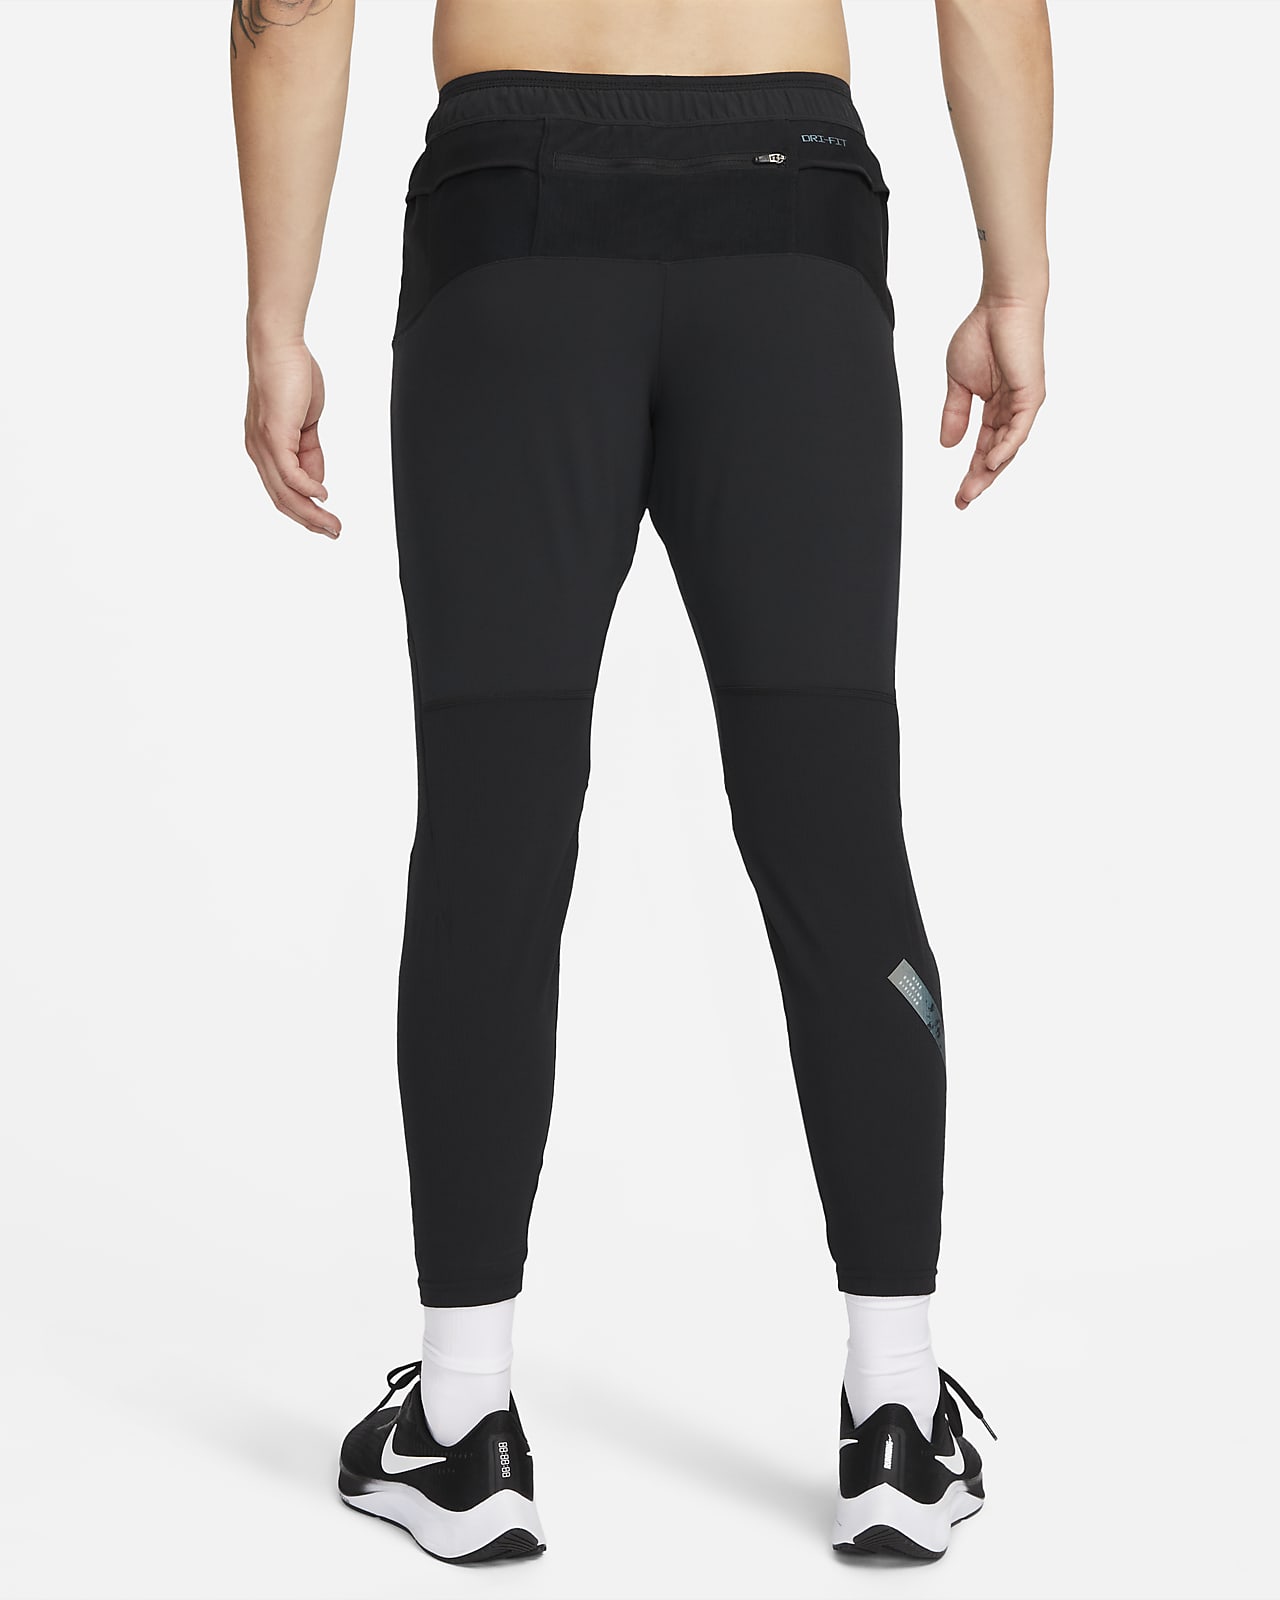 https://static.nike.com/a/images/t_PDP_1280_v1/f_auto,q_auto:eco/52f52b88-70e0-4b78-af1a-79b64137d92a/dri-fit-running-division-phenom-slim-fit-running-trousers-9whh7V.png